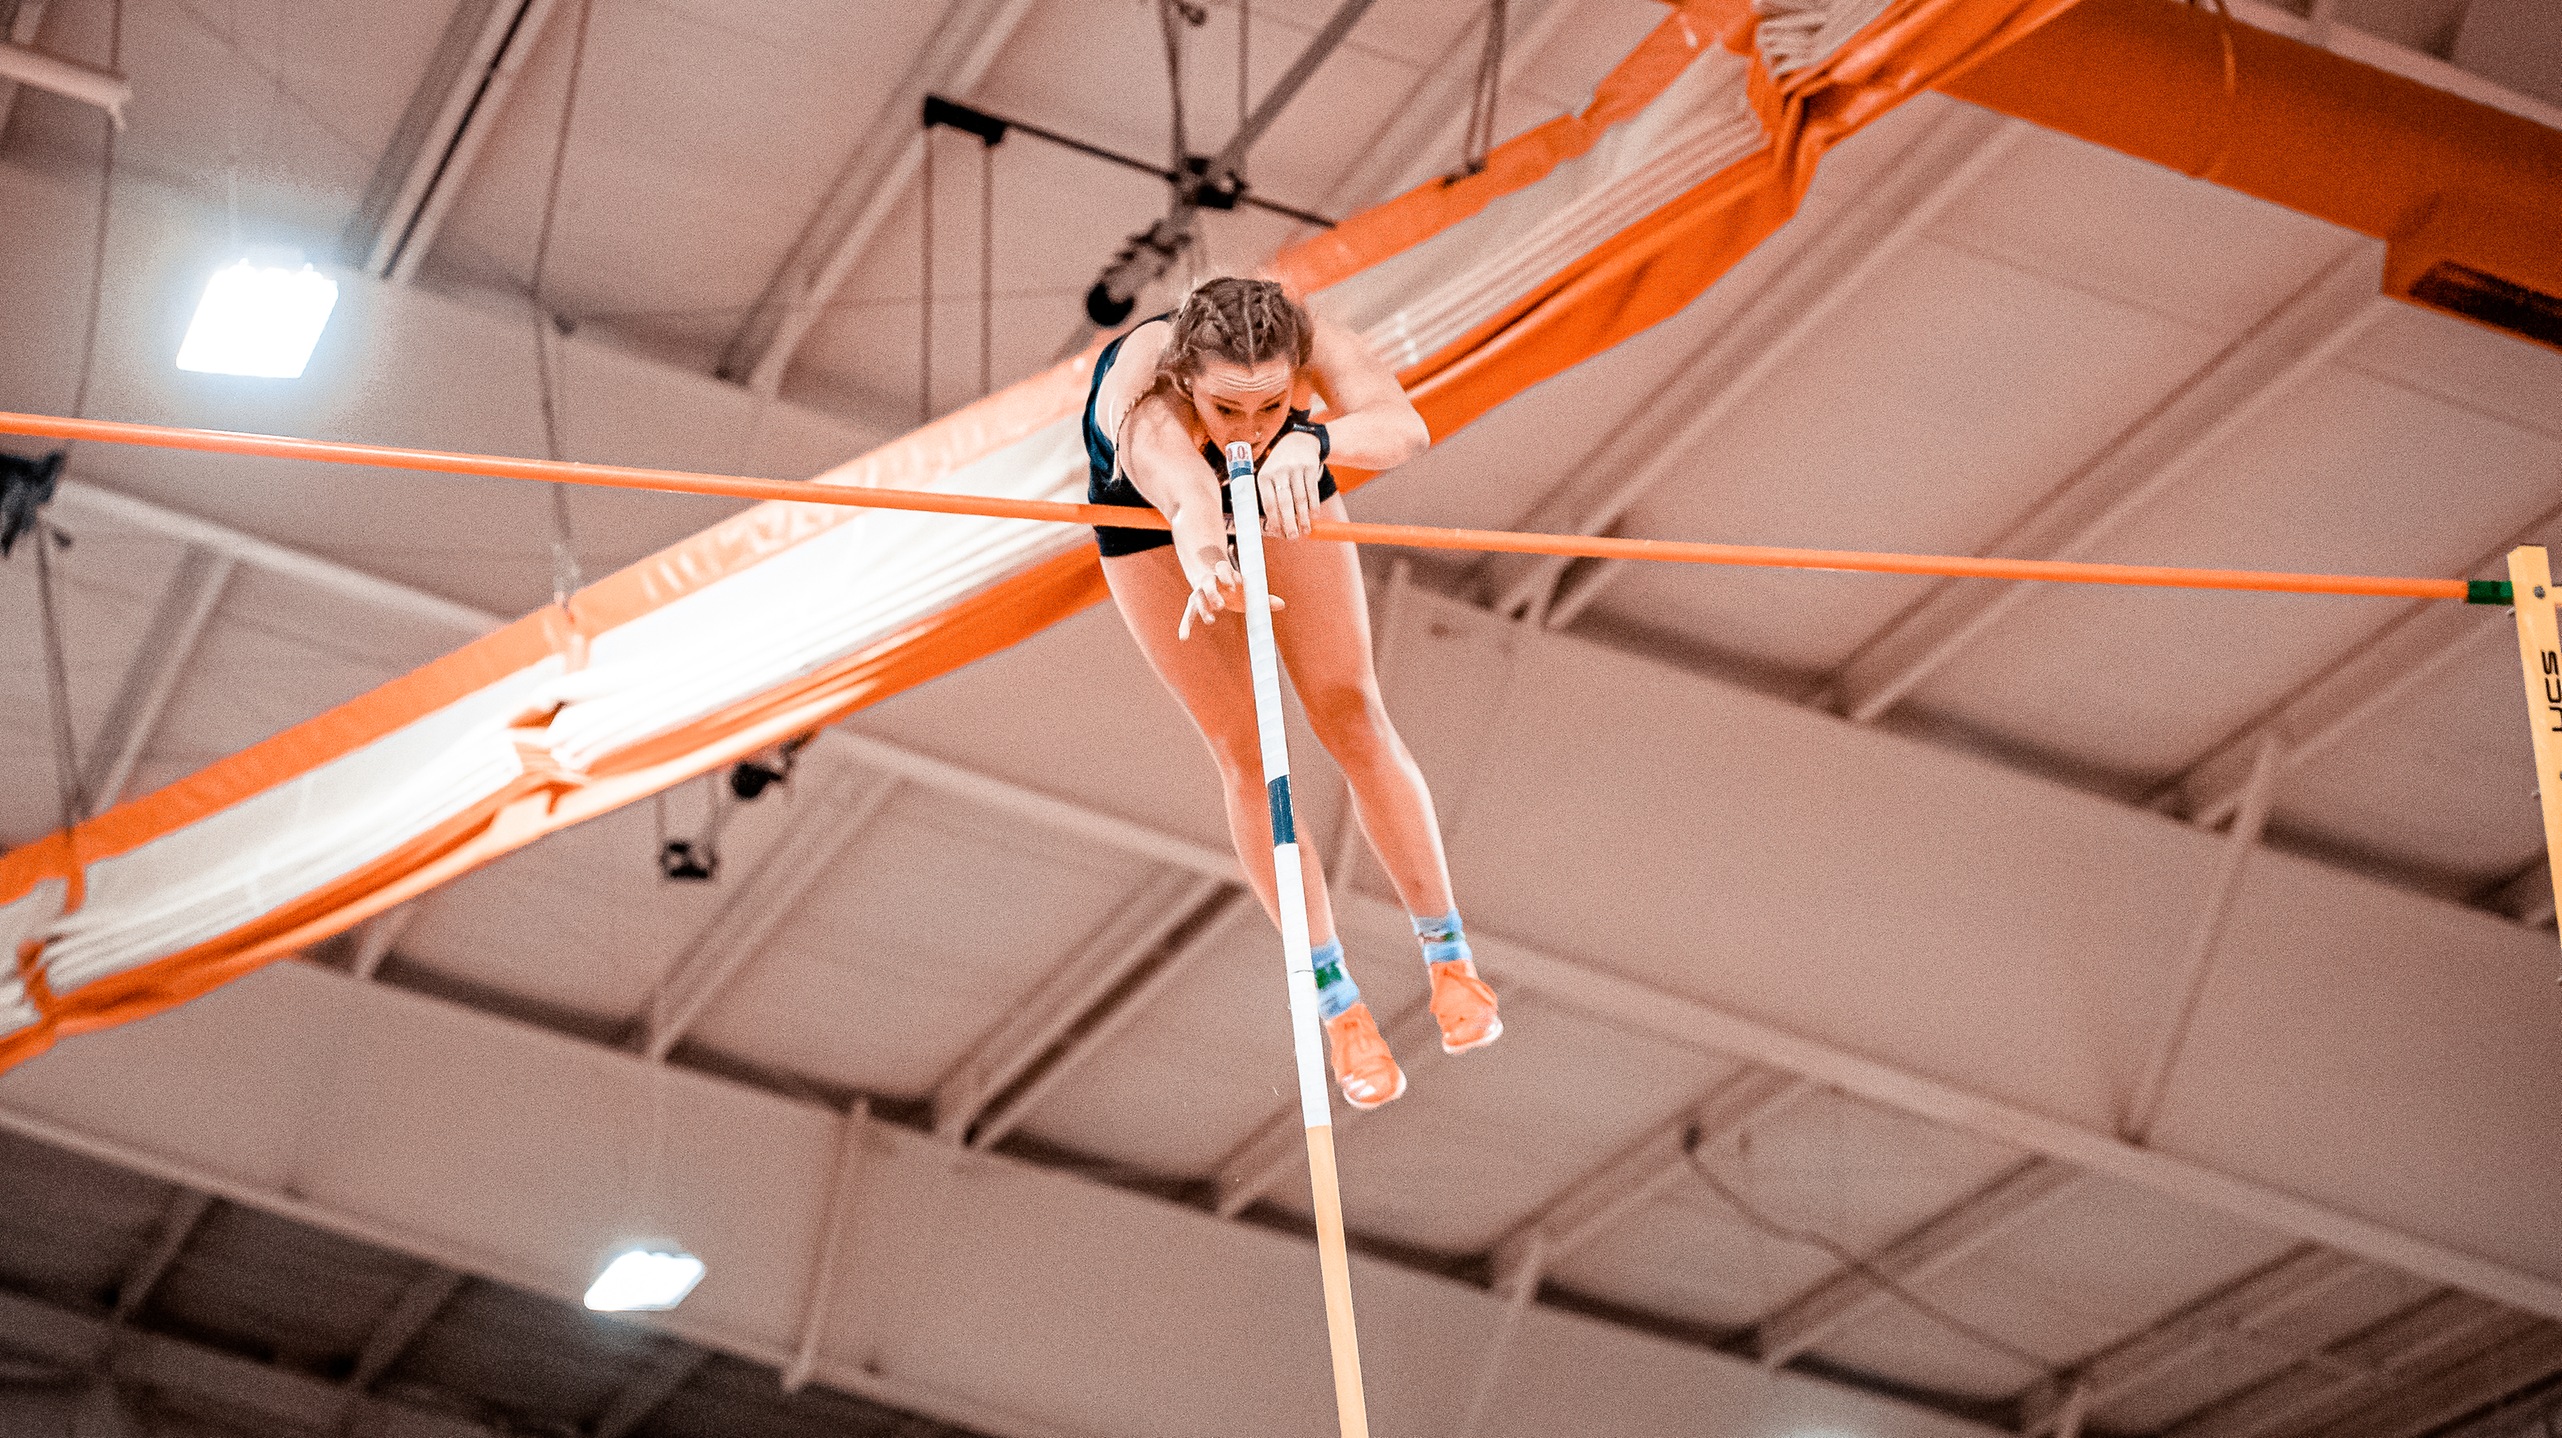 pole vaulter in air